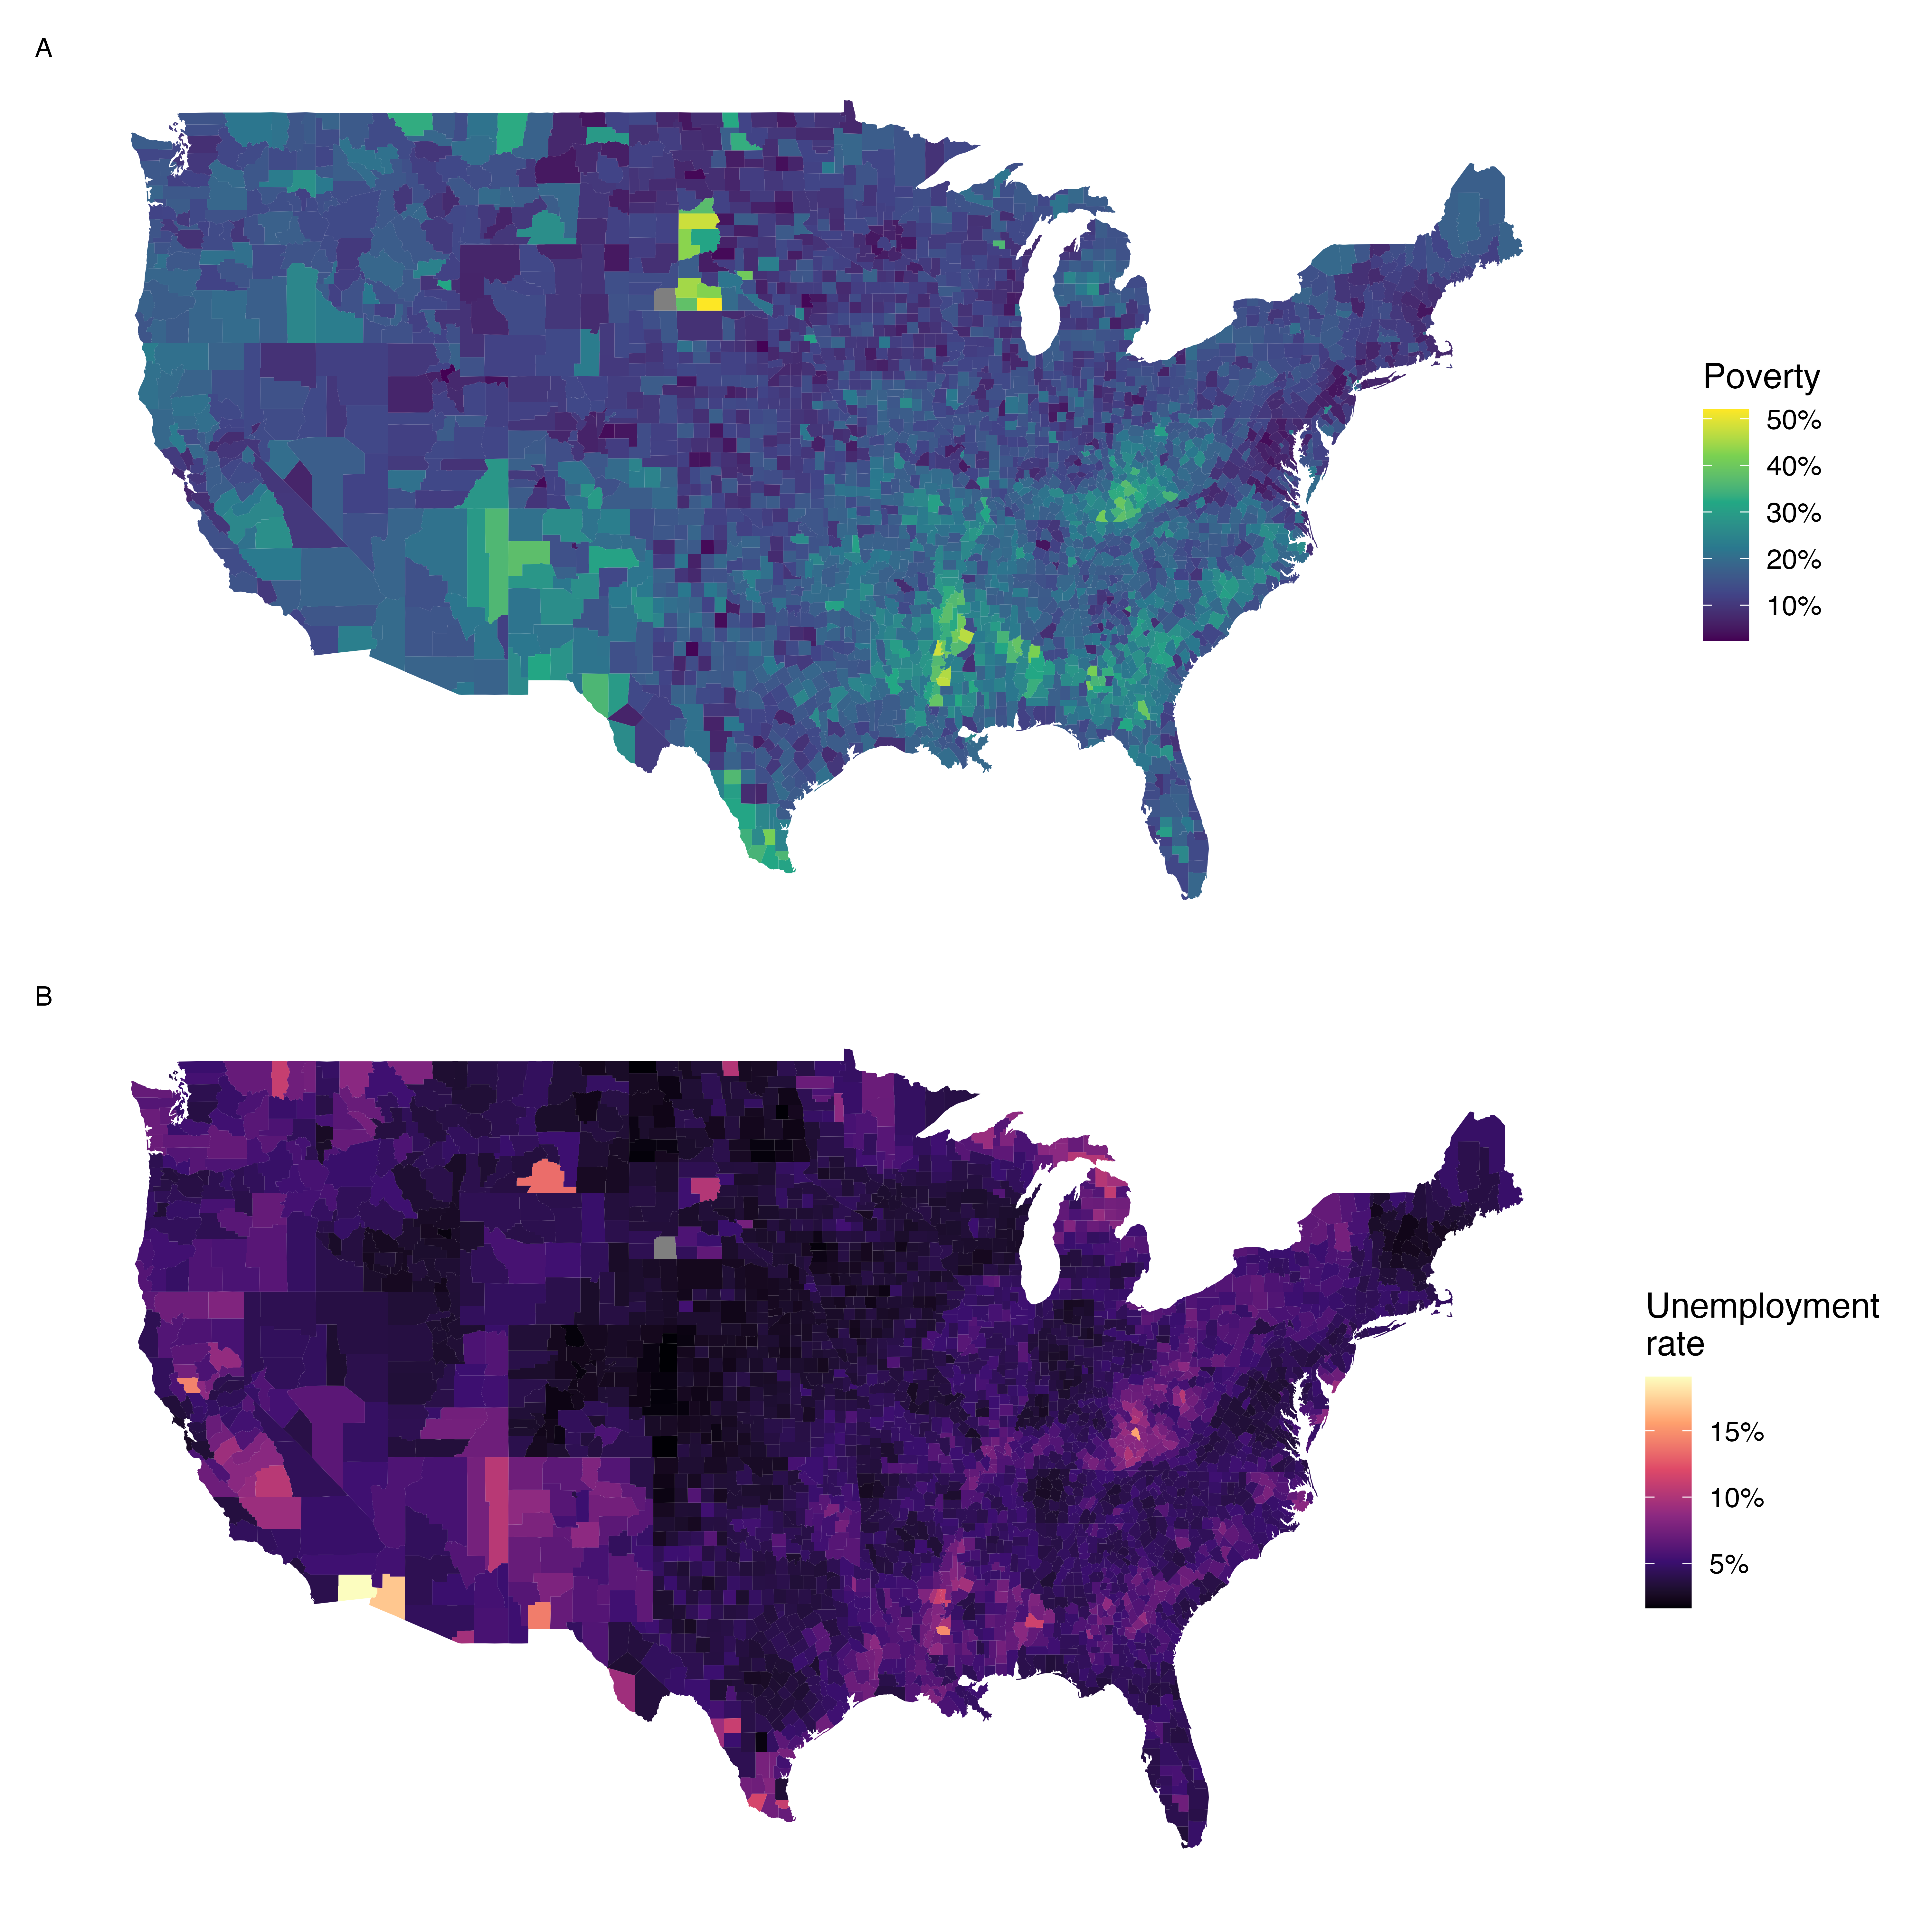 Two intensity map (also called heatmaps) of the United States. Each county is colored by the value of a variables.  In the top plot, the county is colored by the poverty rate which is higher in the south and parts of the midwest.  In the bottom plot, the county is colored by the unemployment rate which seems higher in the southwest and parts of the post-industrial Midwest.